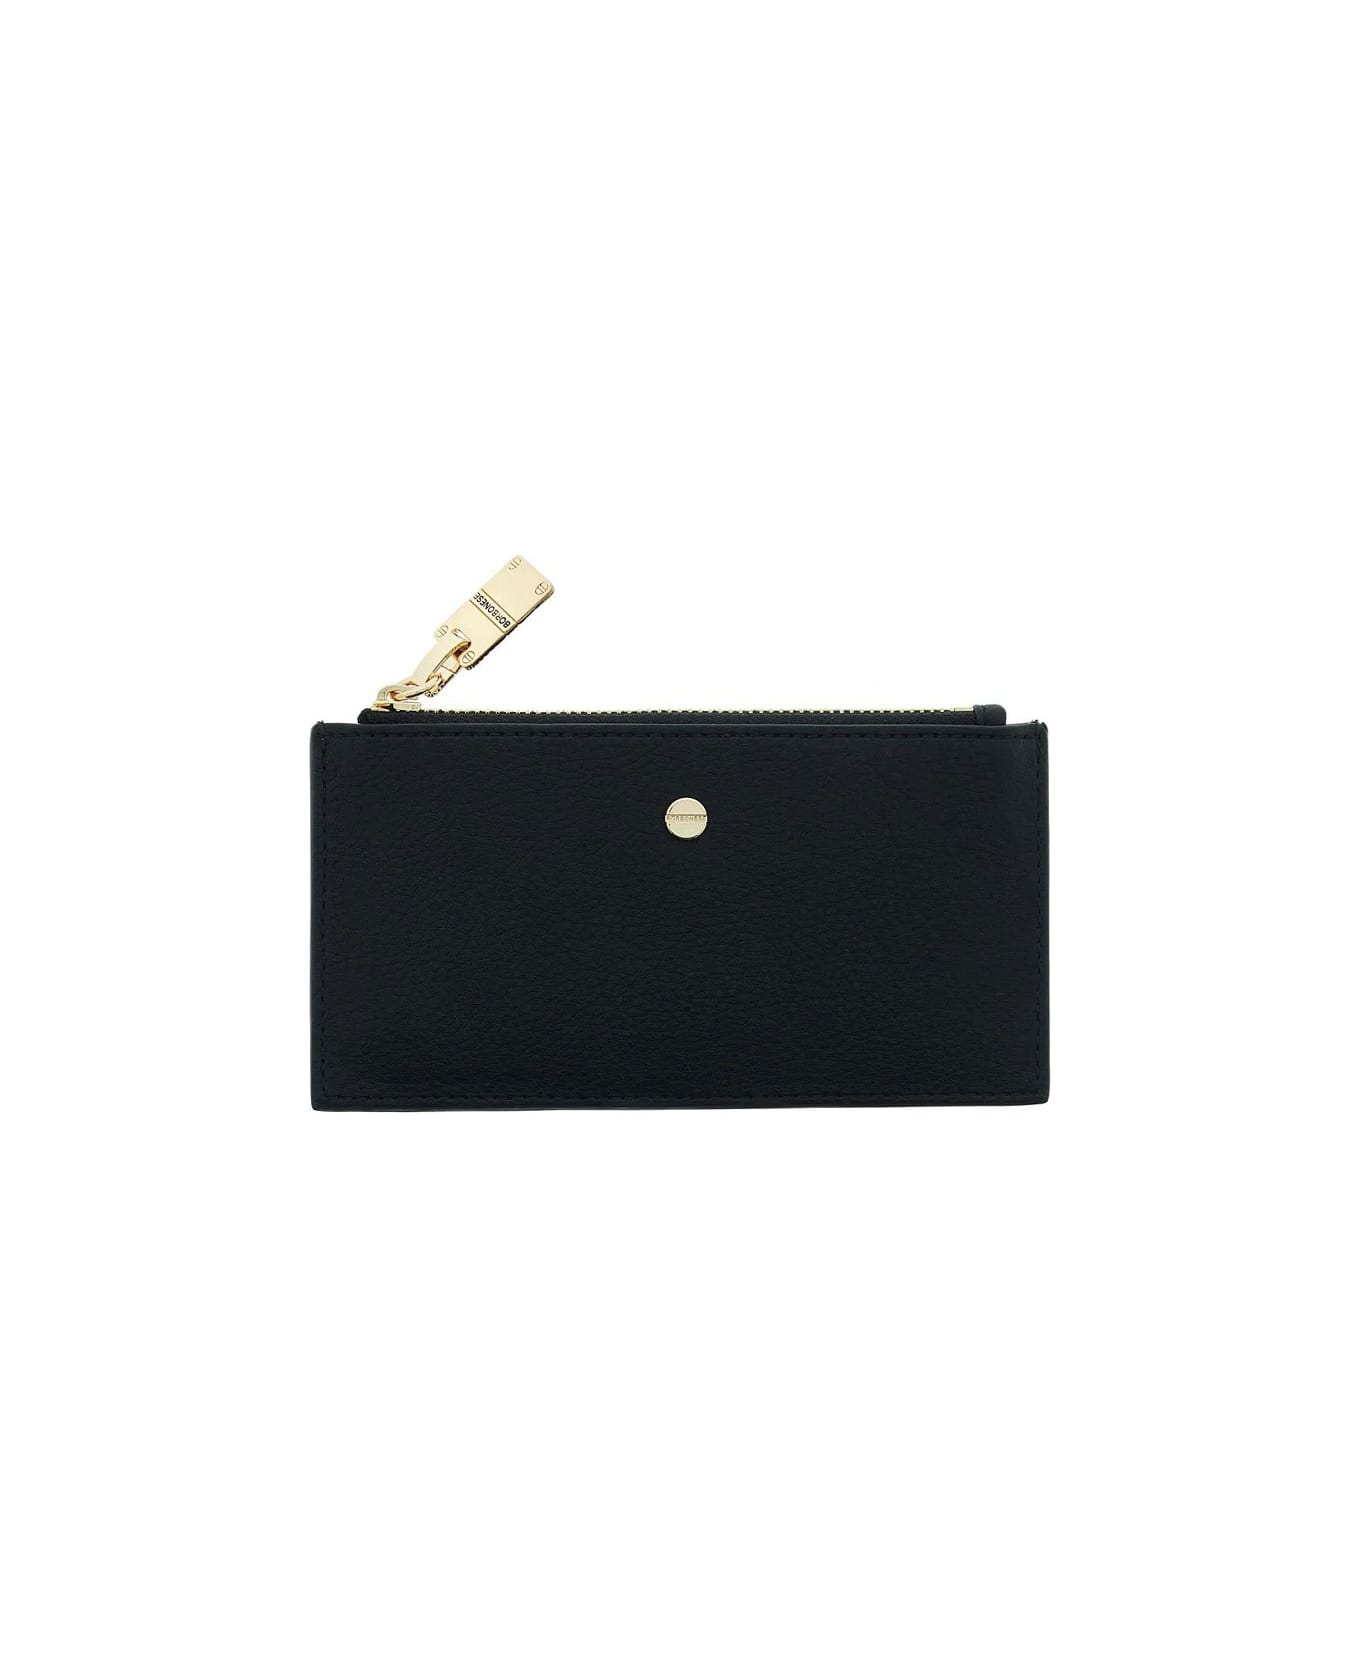 Borbonese Leather And Coated Canvas Card Holder Op Borbonese - BLACK